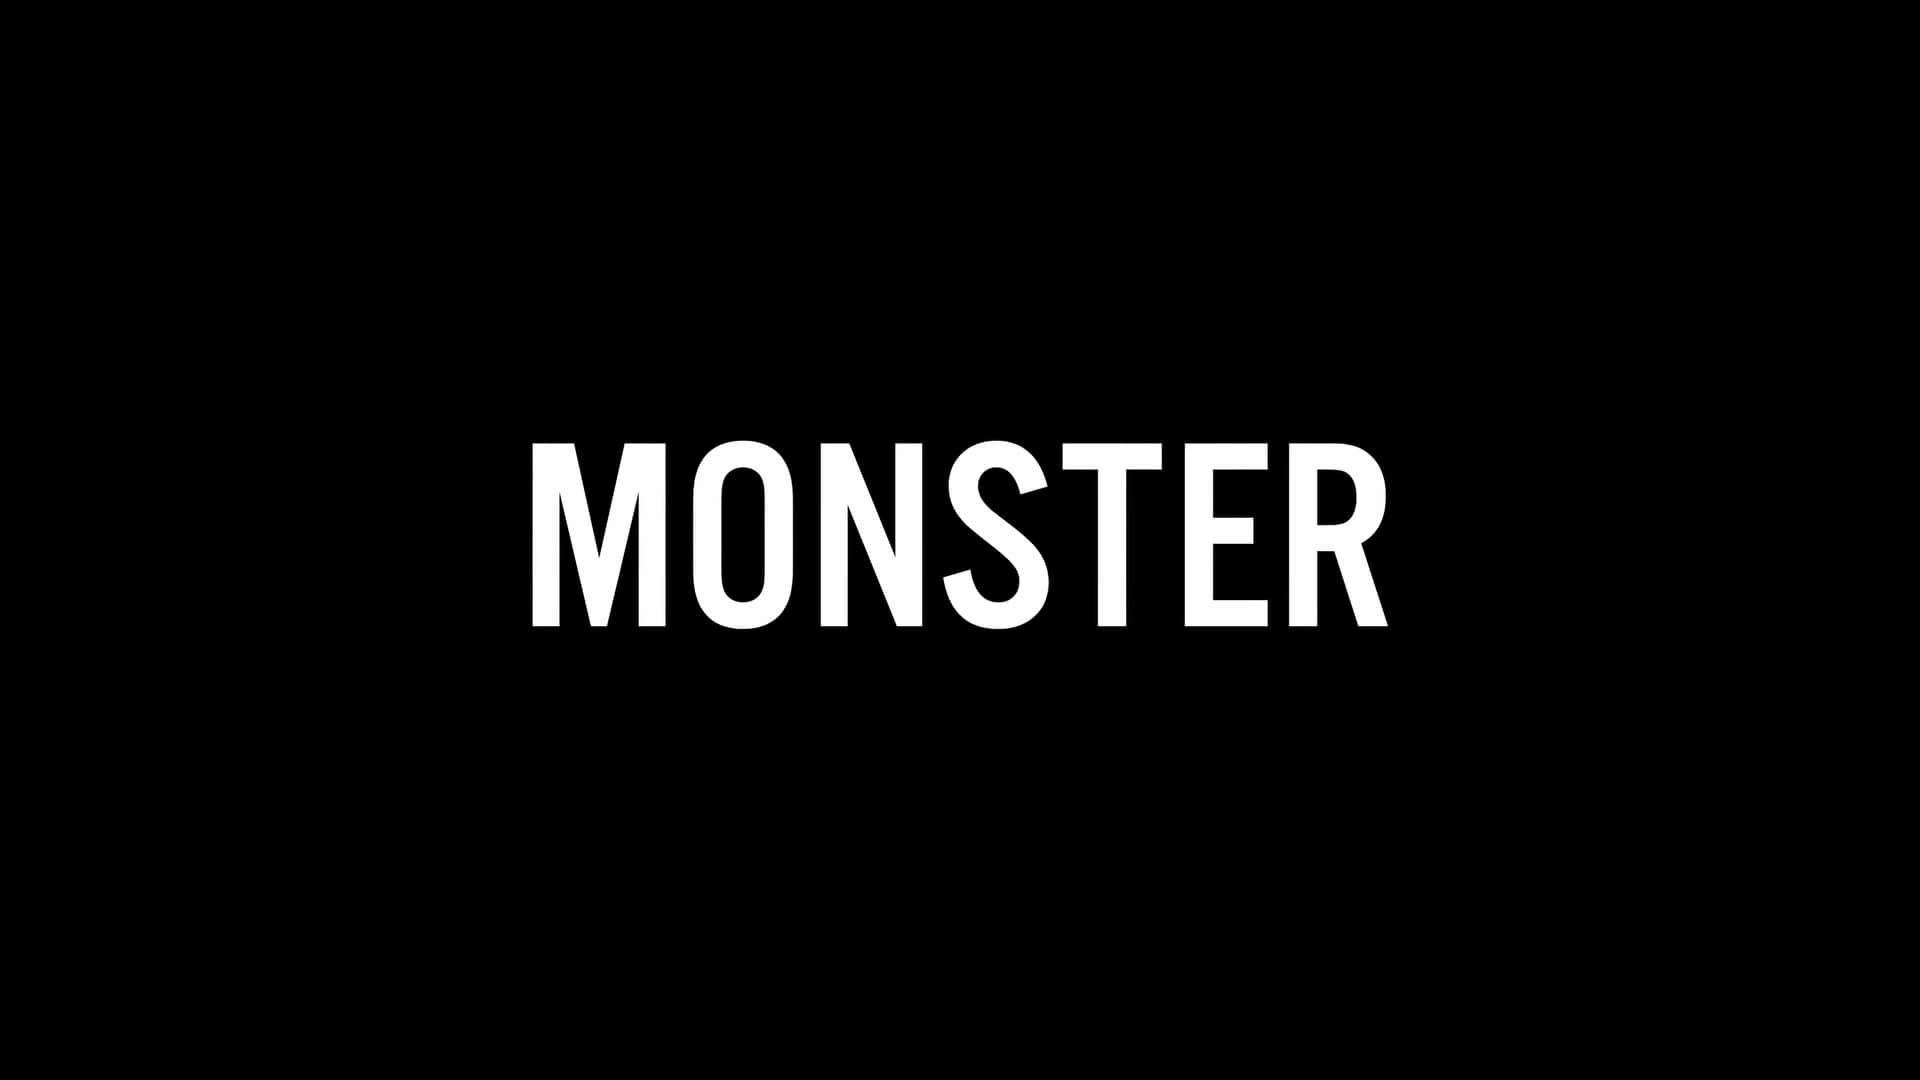 🎬 Monster [TRAILER] Coming to Netflix May 7, 2021 1